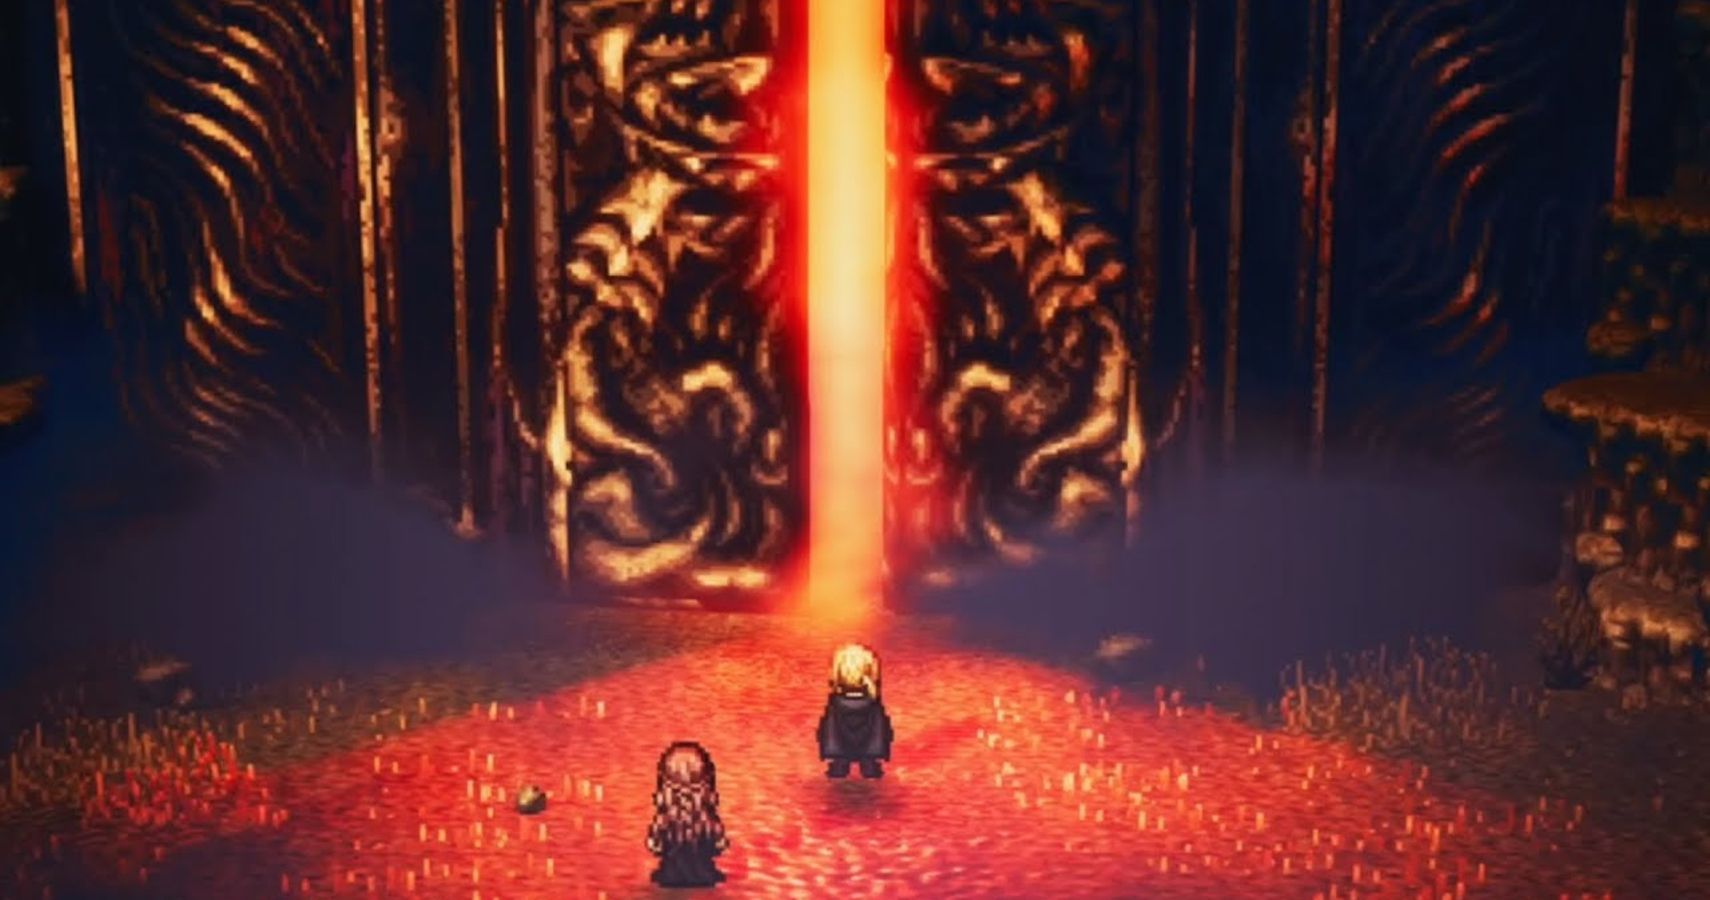 The Gate of Finish, which is the location of the final dungeon in Octopath Traveler